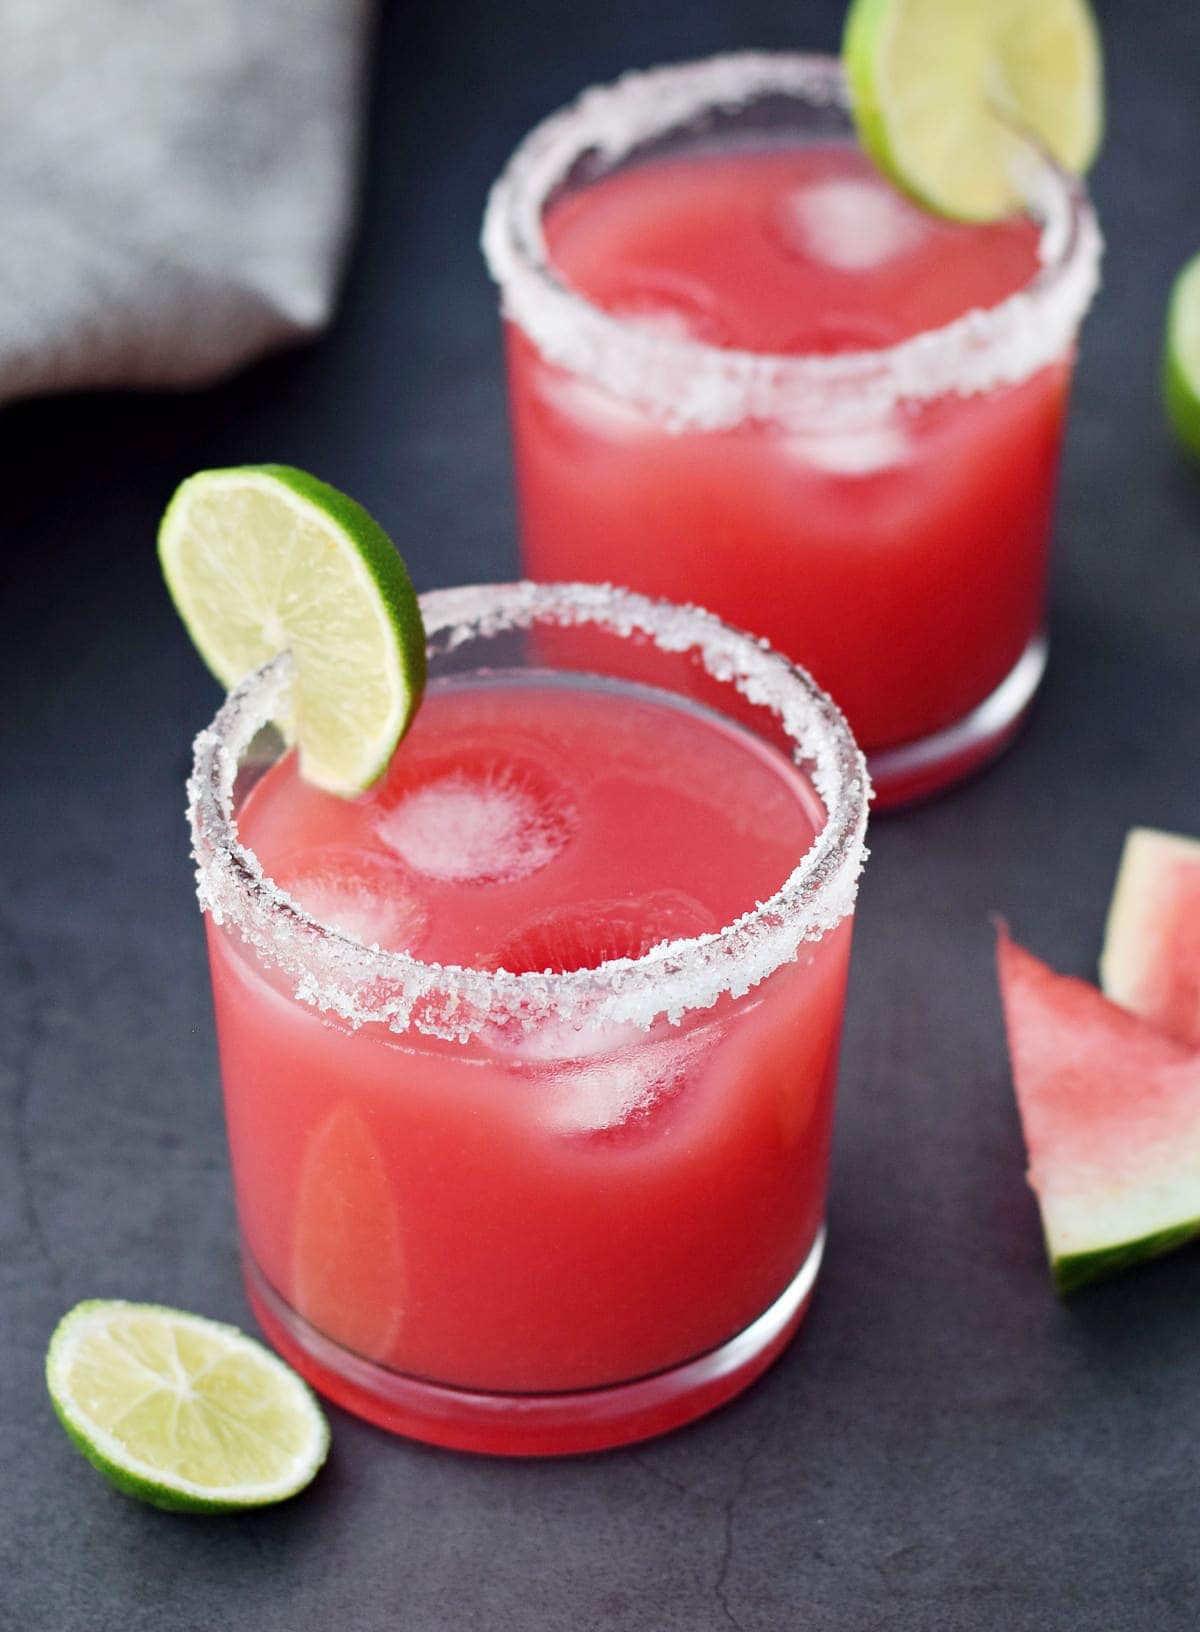 watermelon tequila drink with lime slices and salt rim